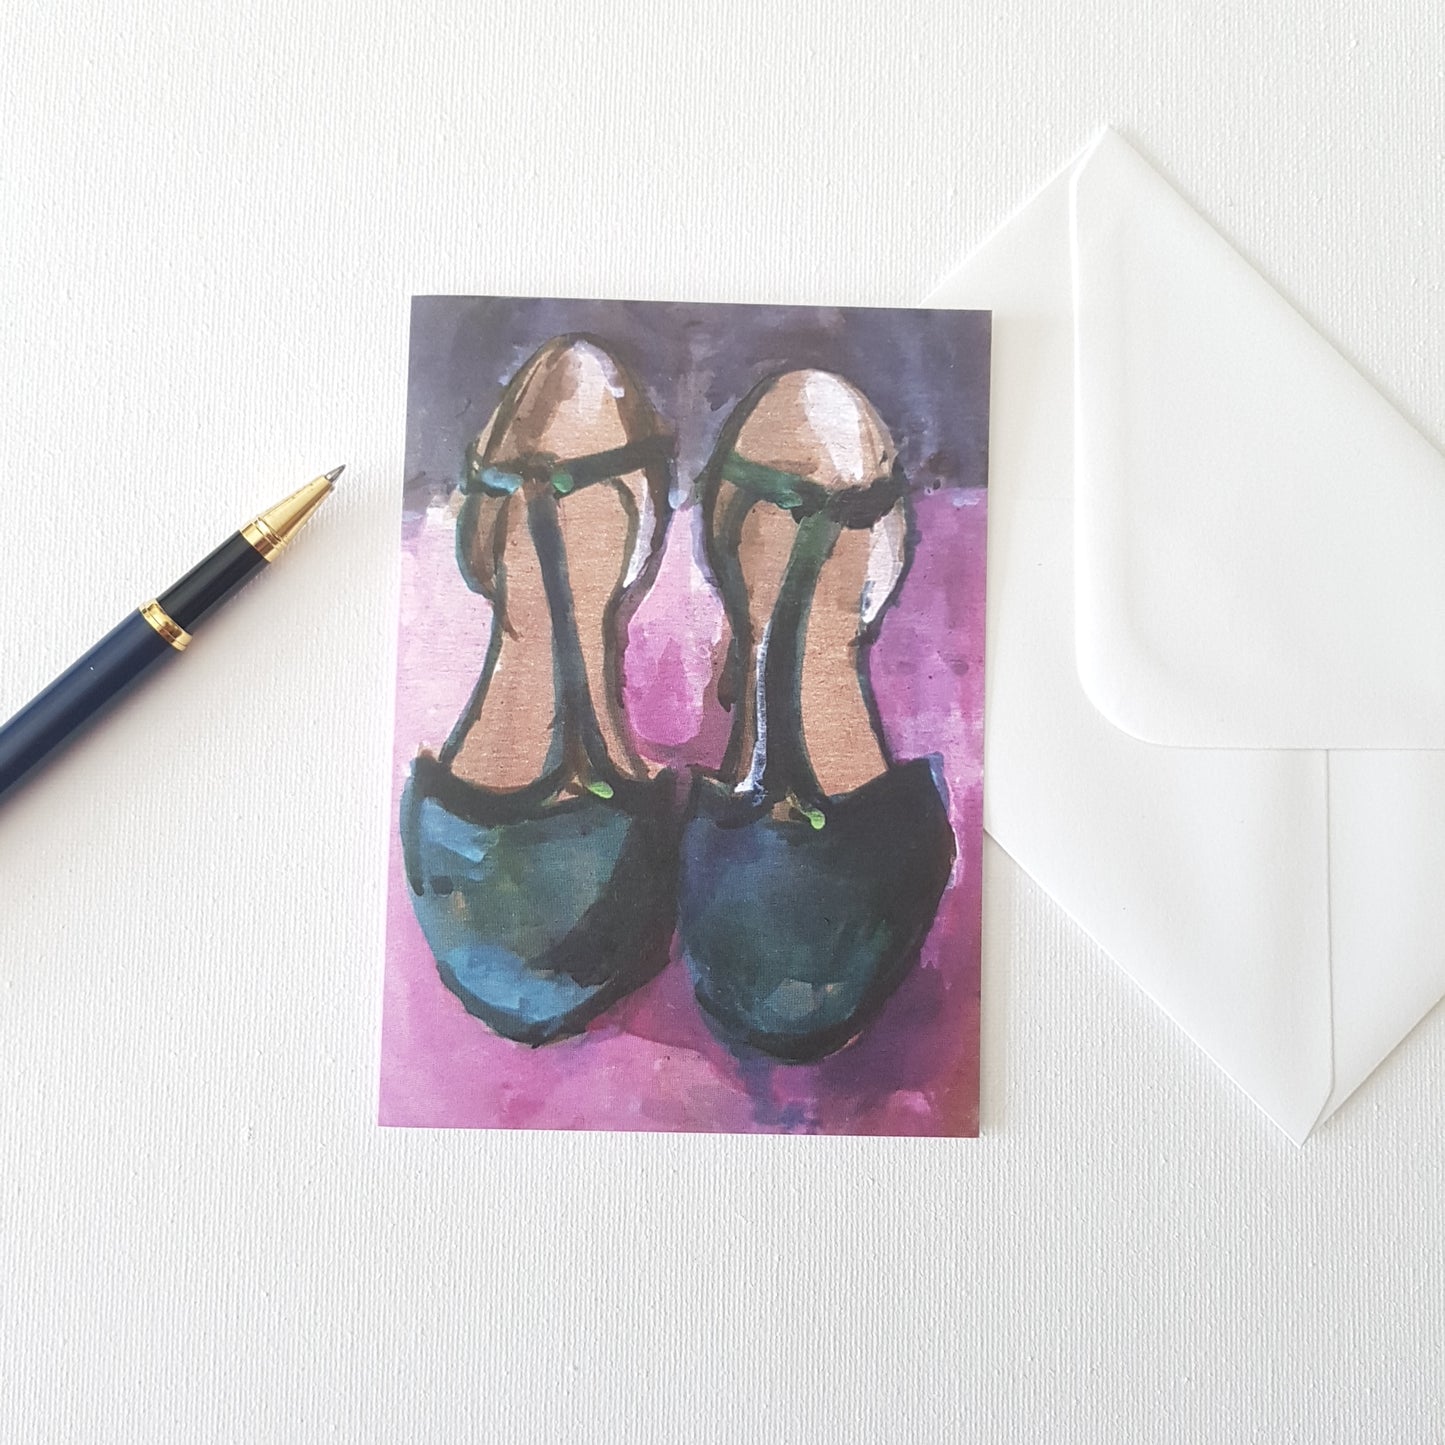 Shoe art greeting card featuring a painting of green t-bar shoes on a pink background by Julia Laing. Placed beside the card on a white table are a pen and white envelope.